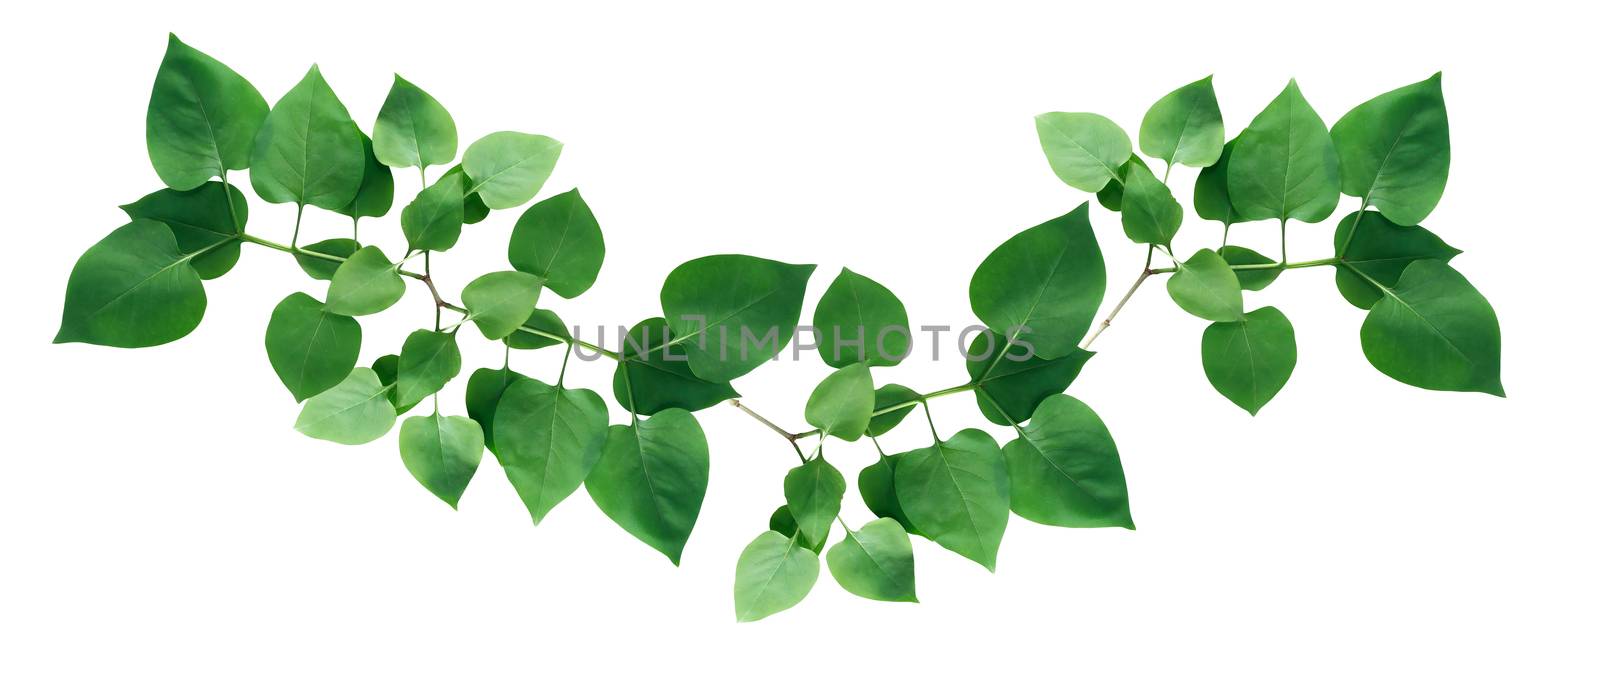 Twig with green leaves as border on white background